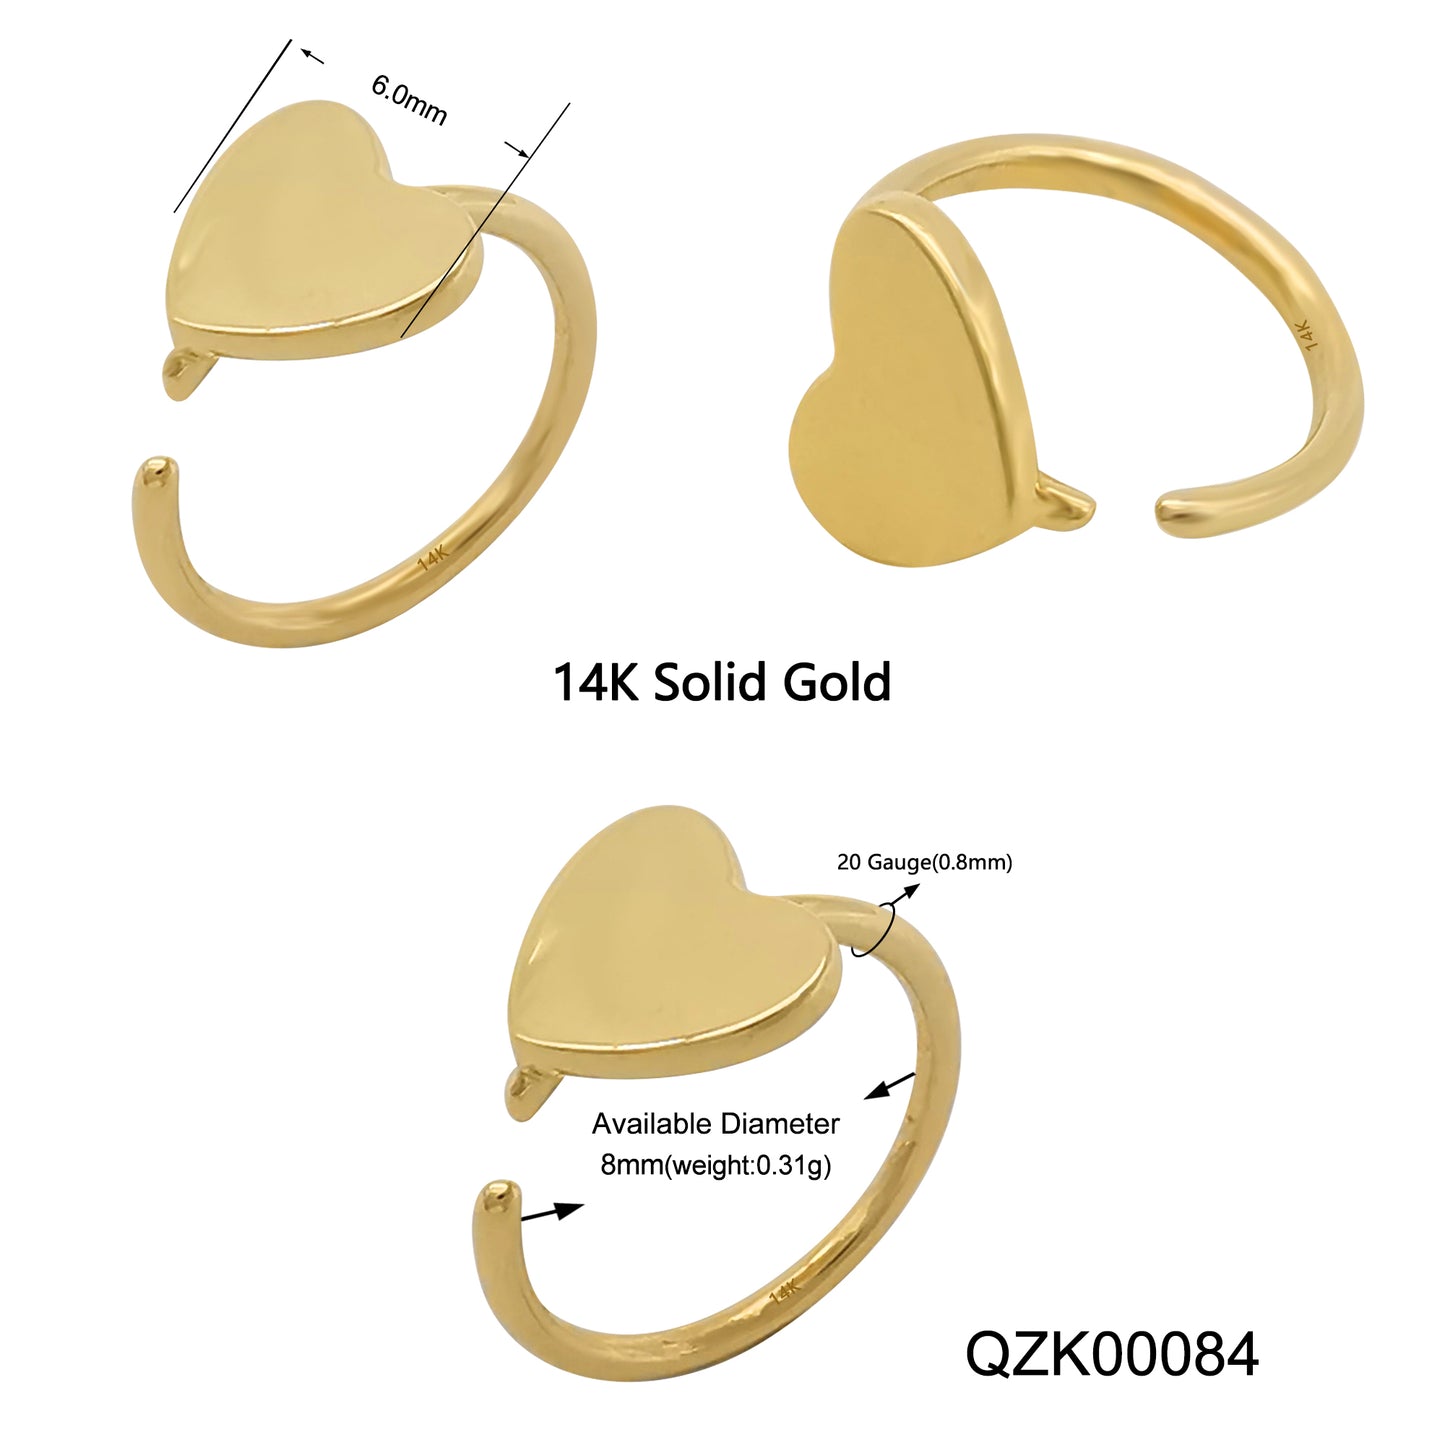 Wholesale 14k Solid Gold Hinged Ring heart shape